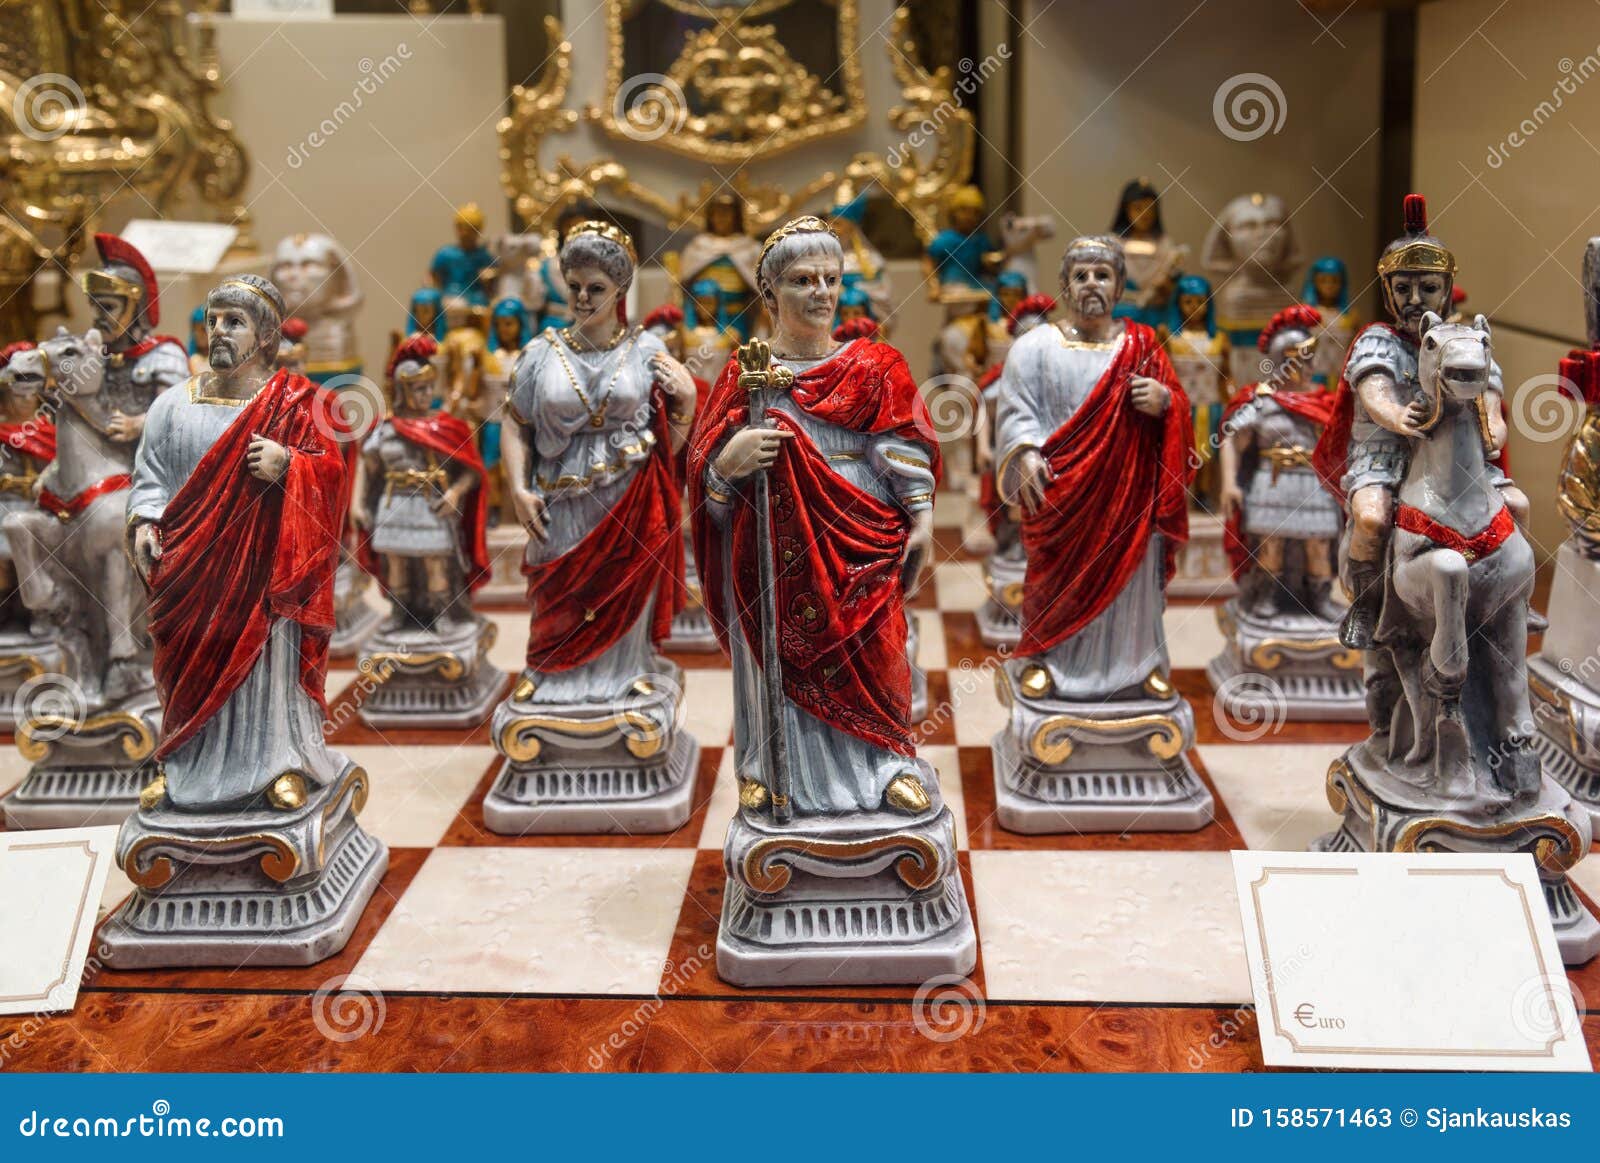 antique roman figure chess set for sale displayed in an antiquities shop window